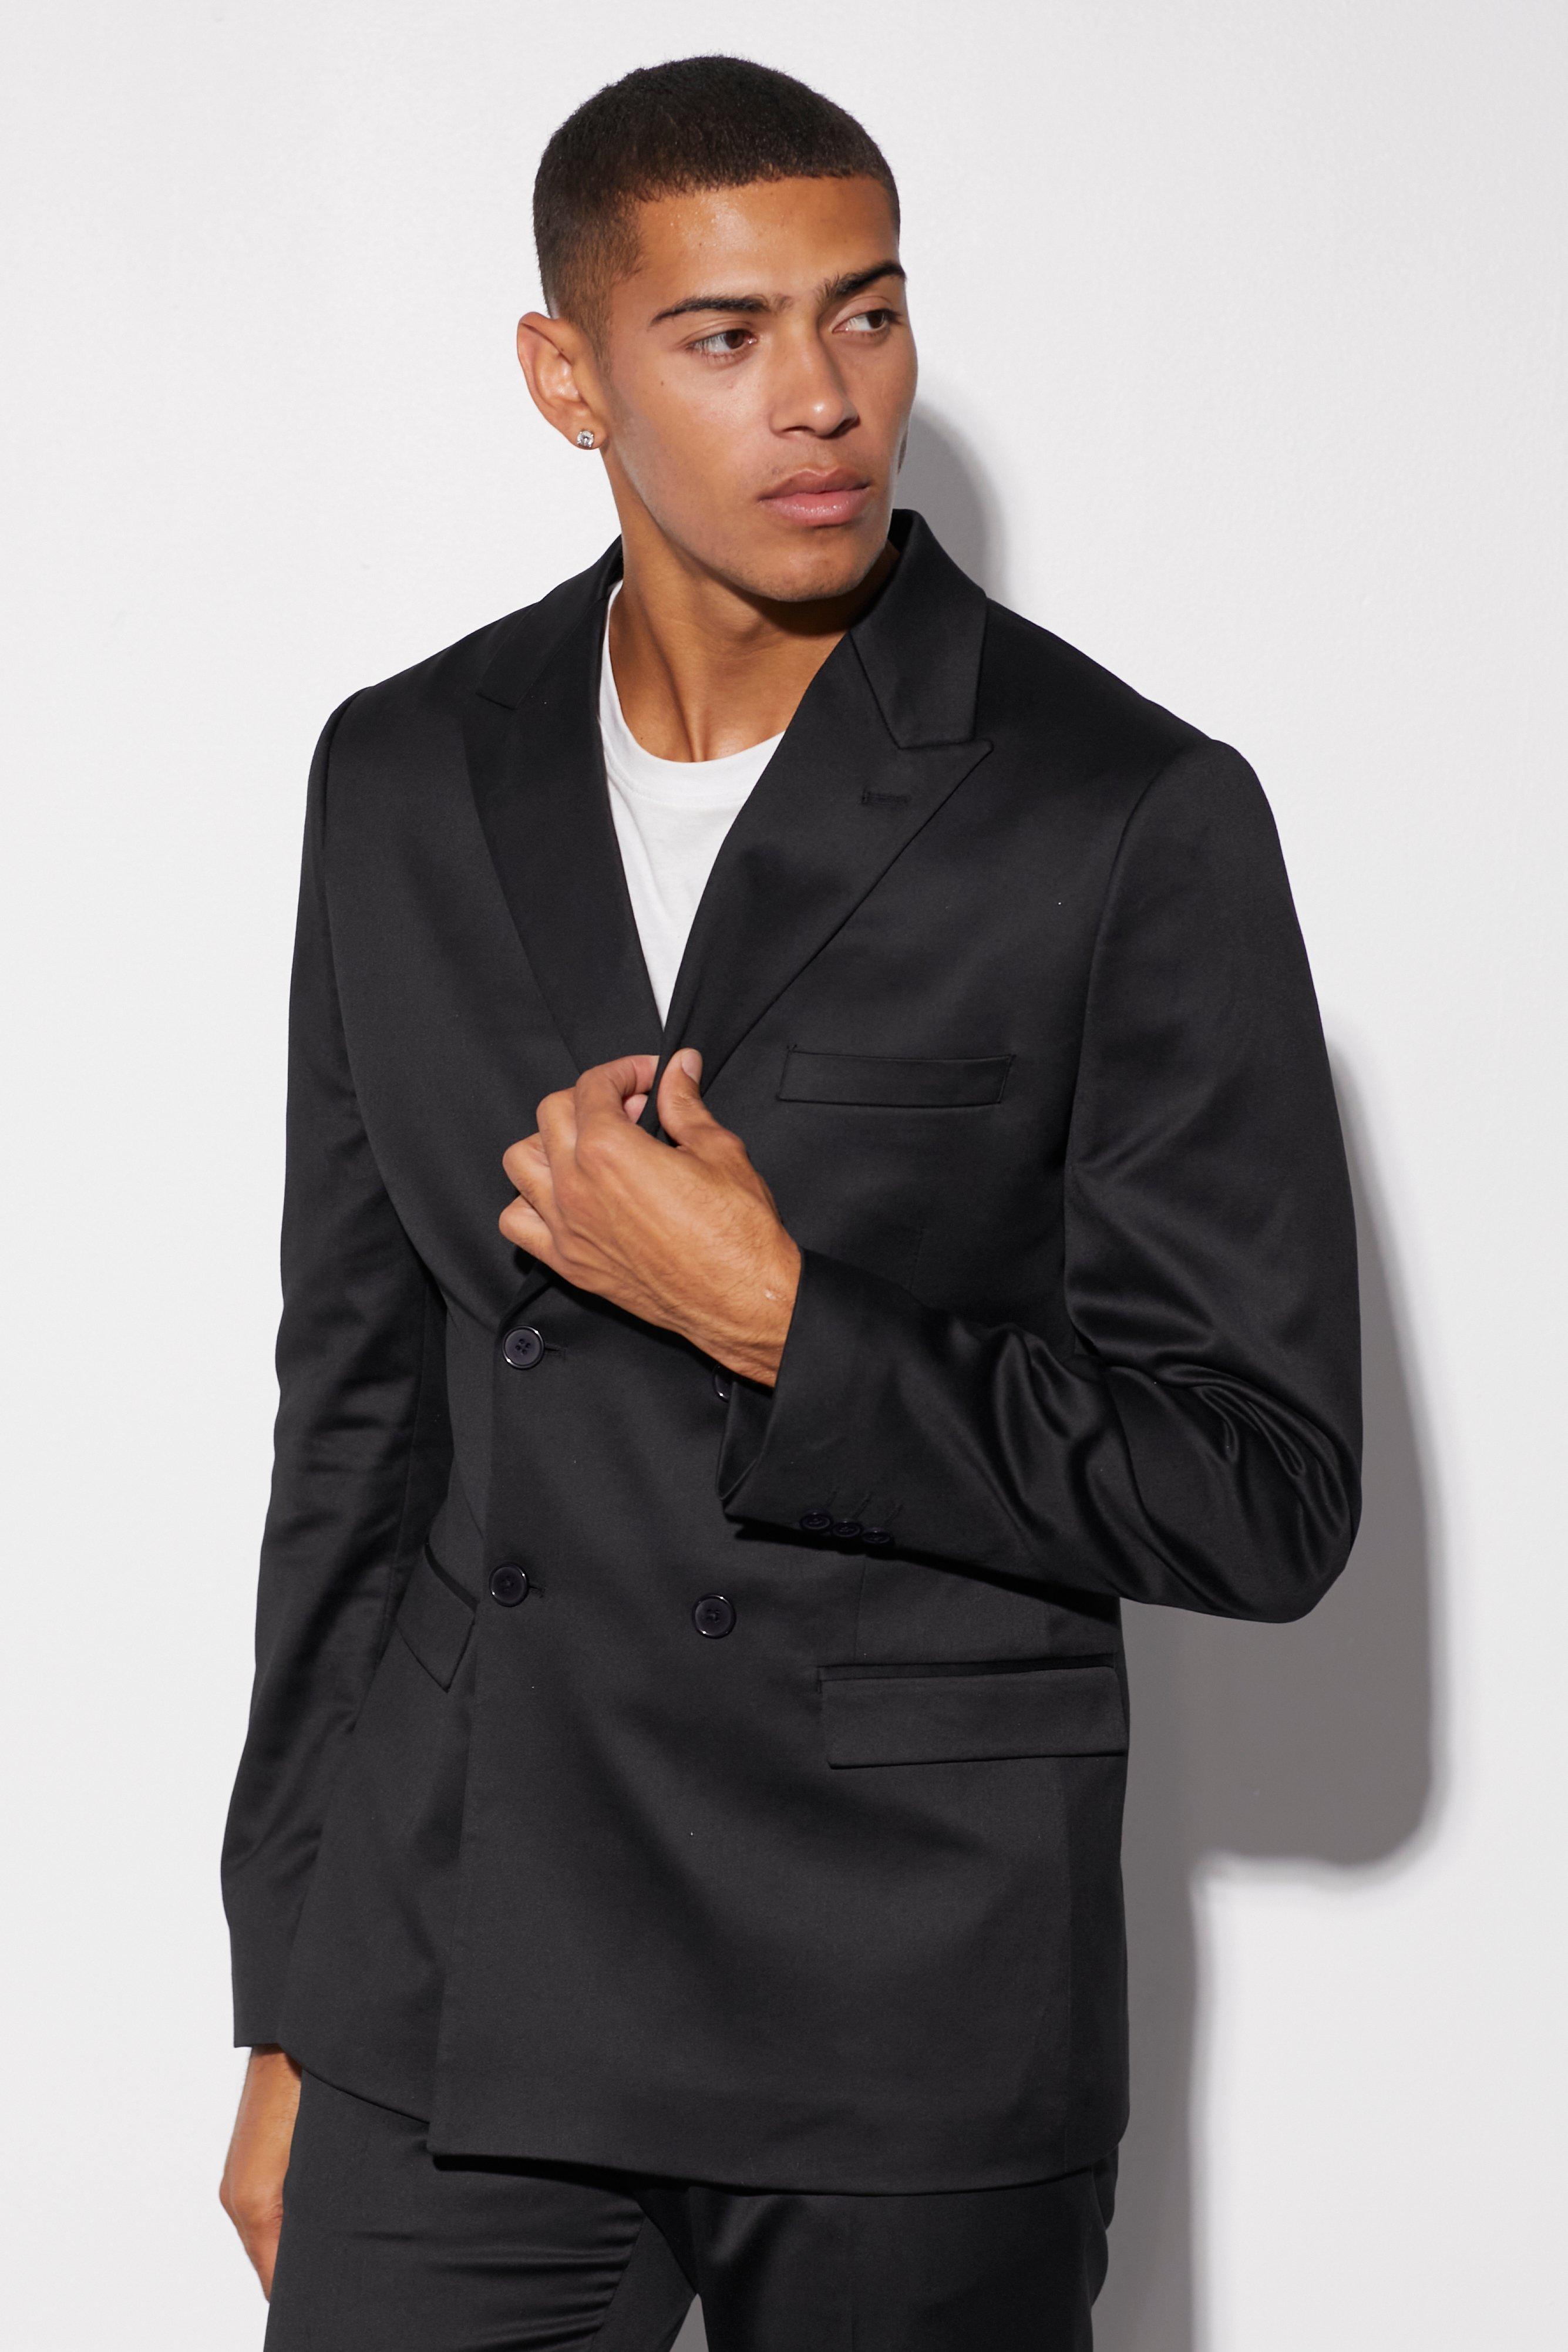 ASOS DESIGN double breasted tux suit blazer in black